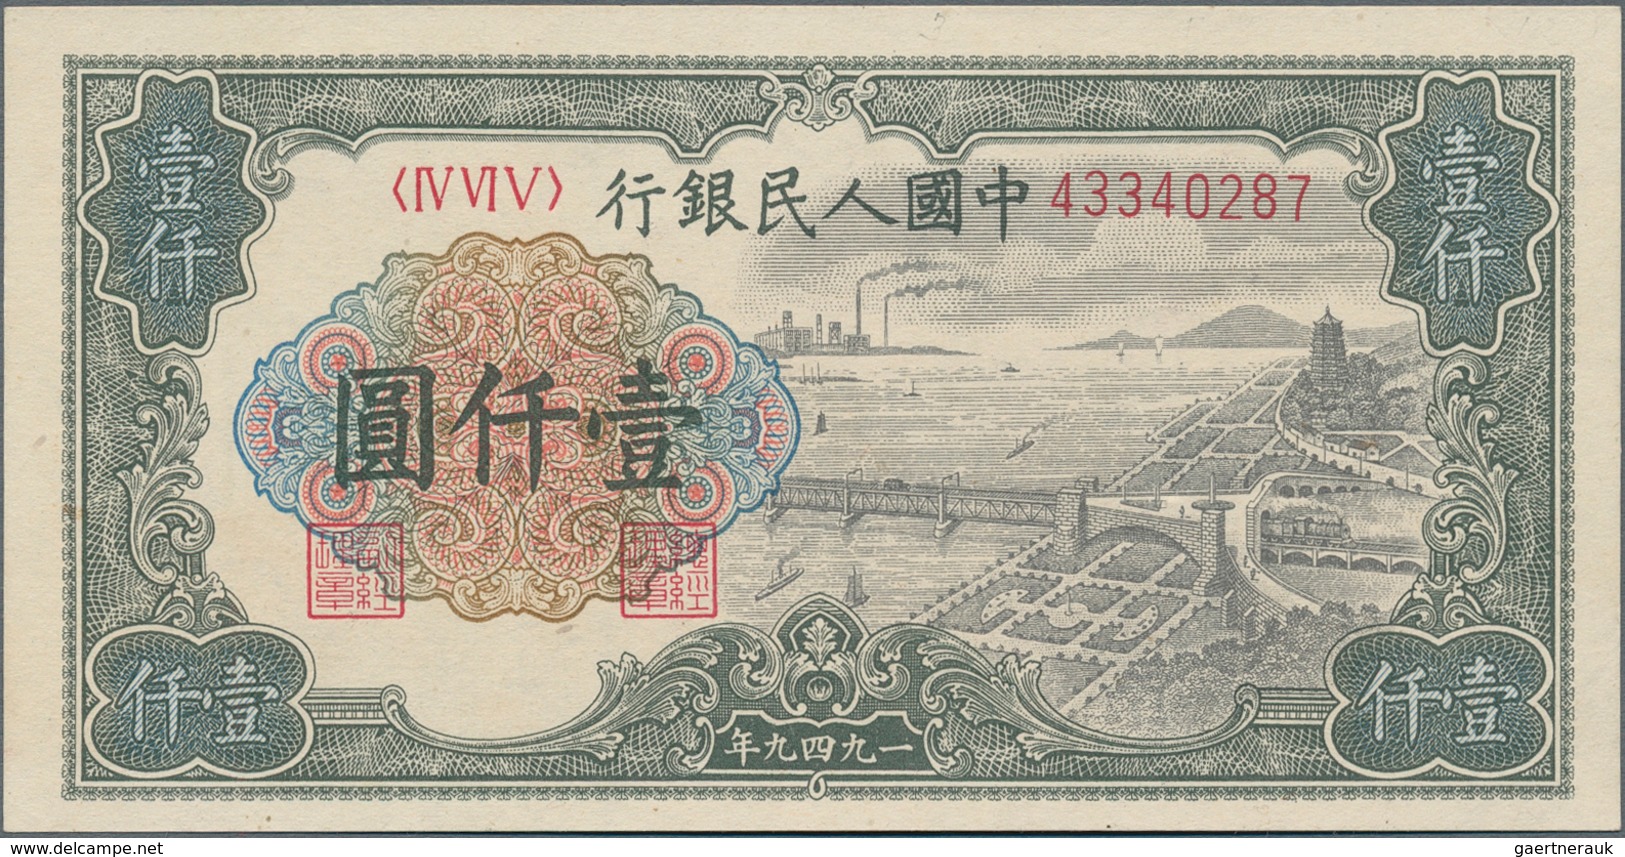 China: Peoples Republic Of China Series 1949 1000 Yuan, P.847 In Perfect UNC Condition. Very Rare! - Cina